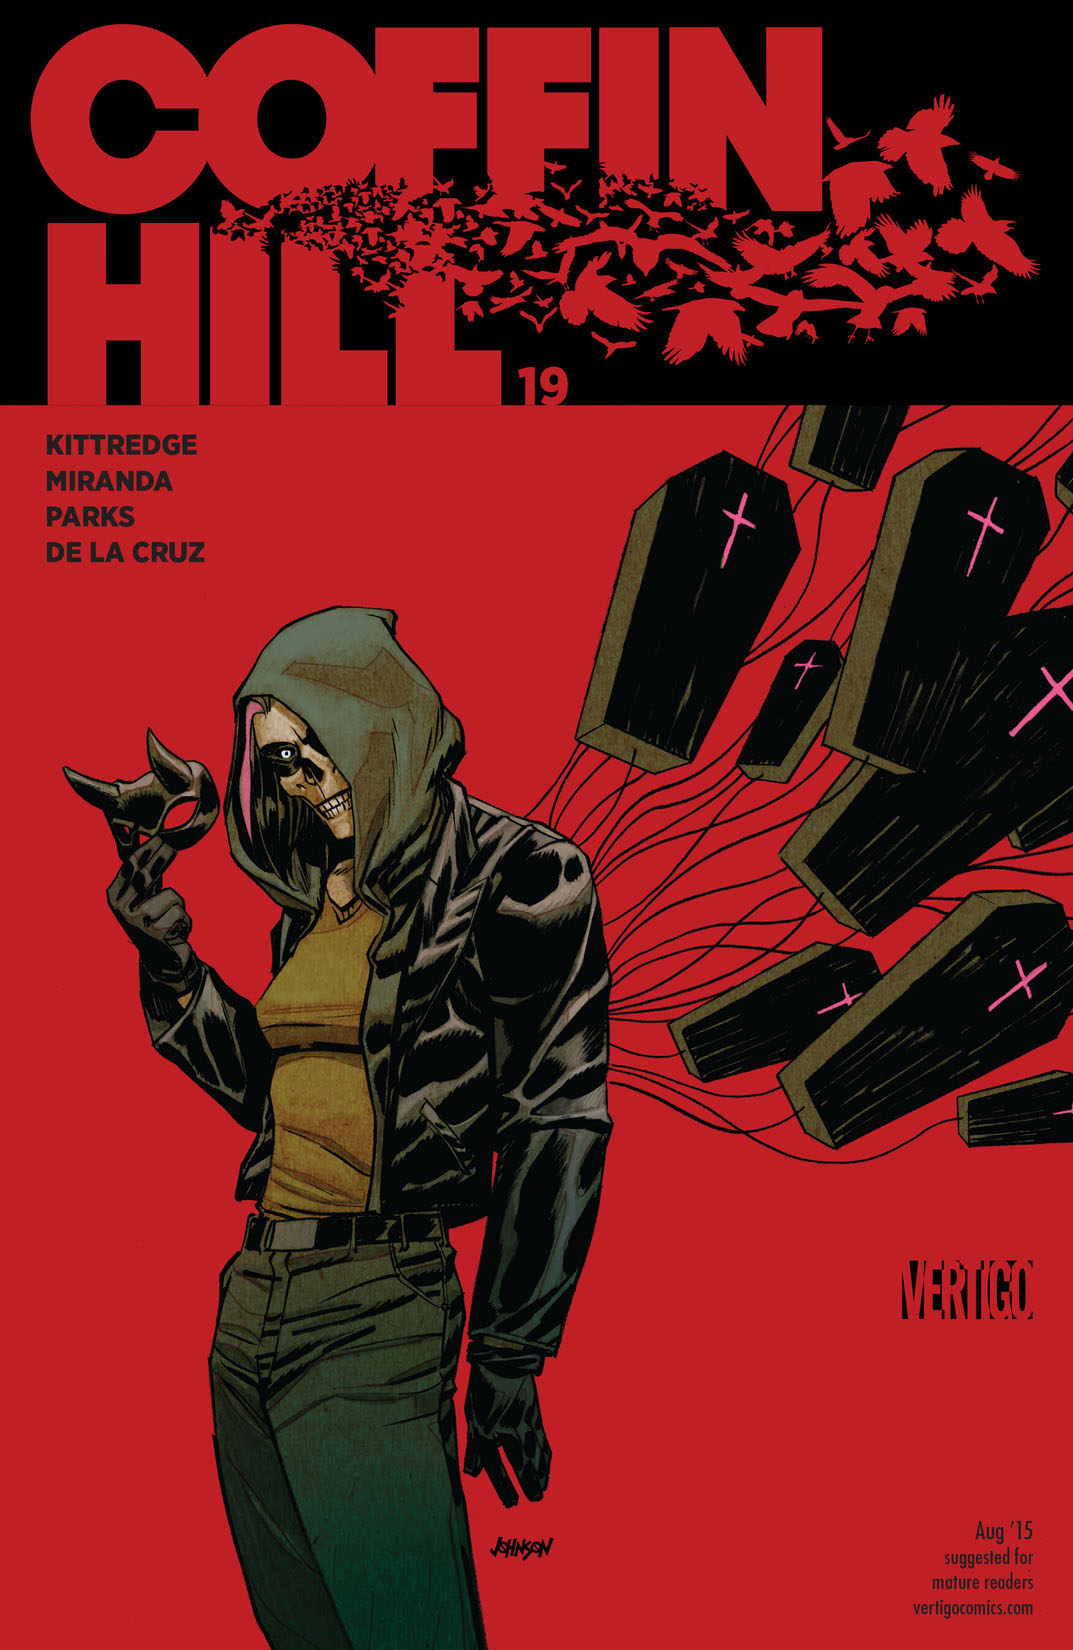 Coffin Hill #19 preview images